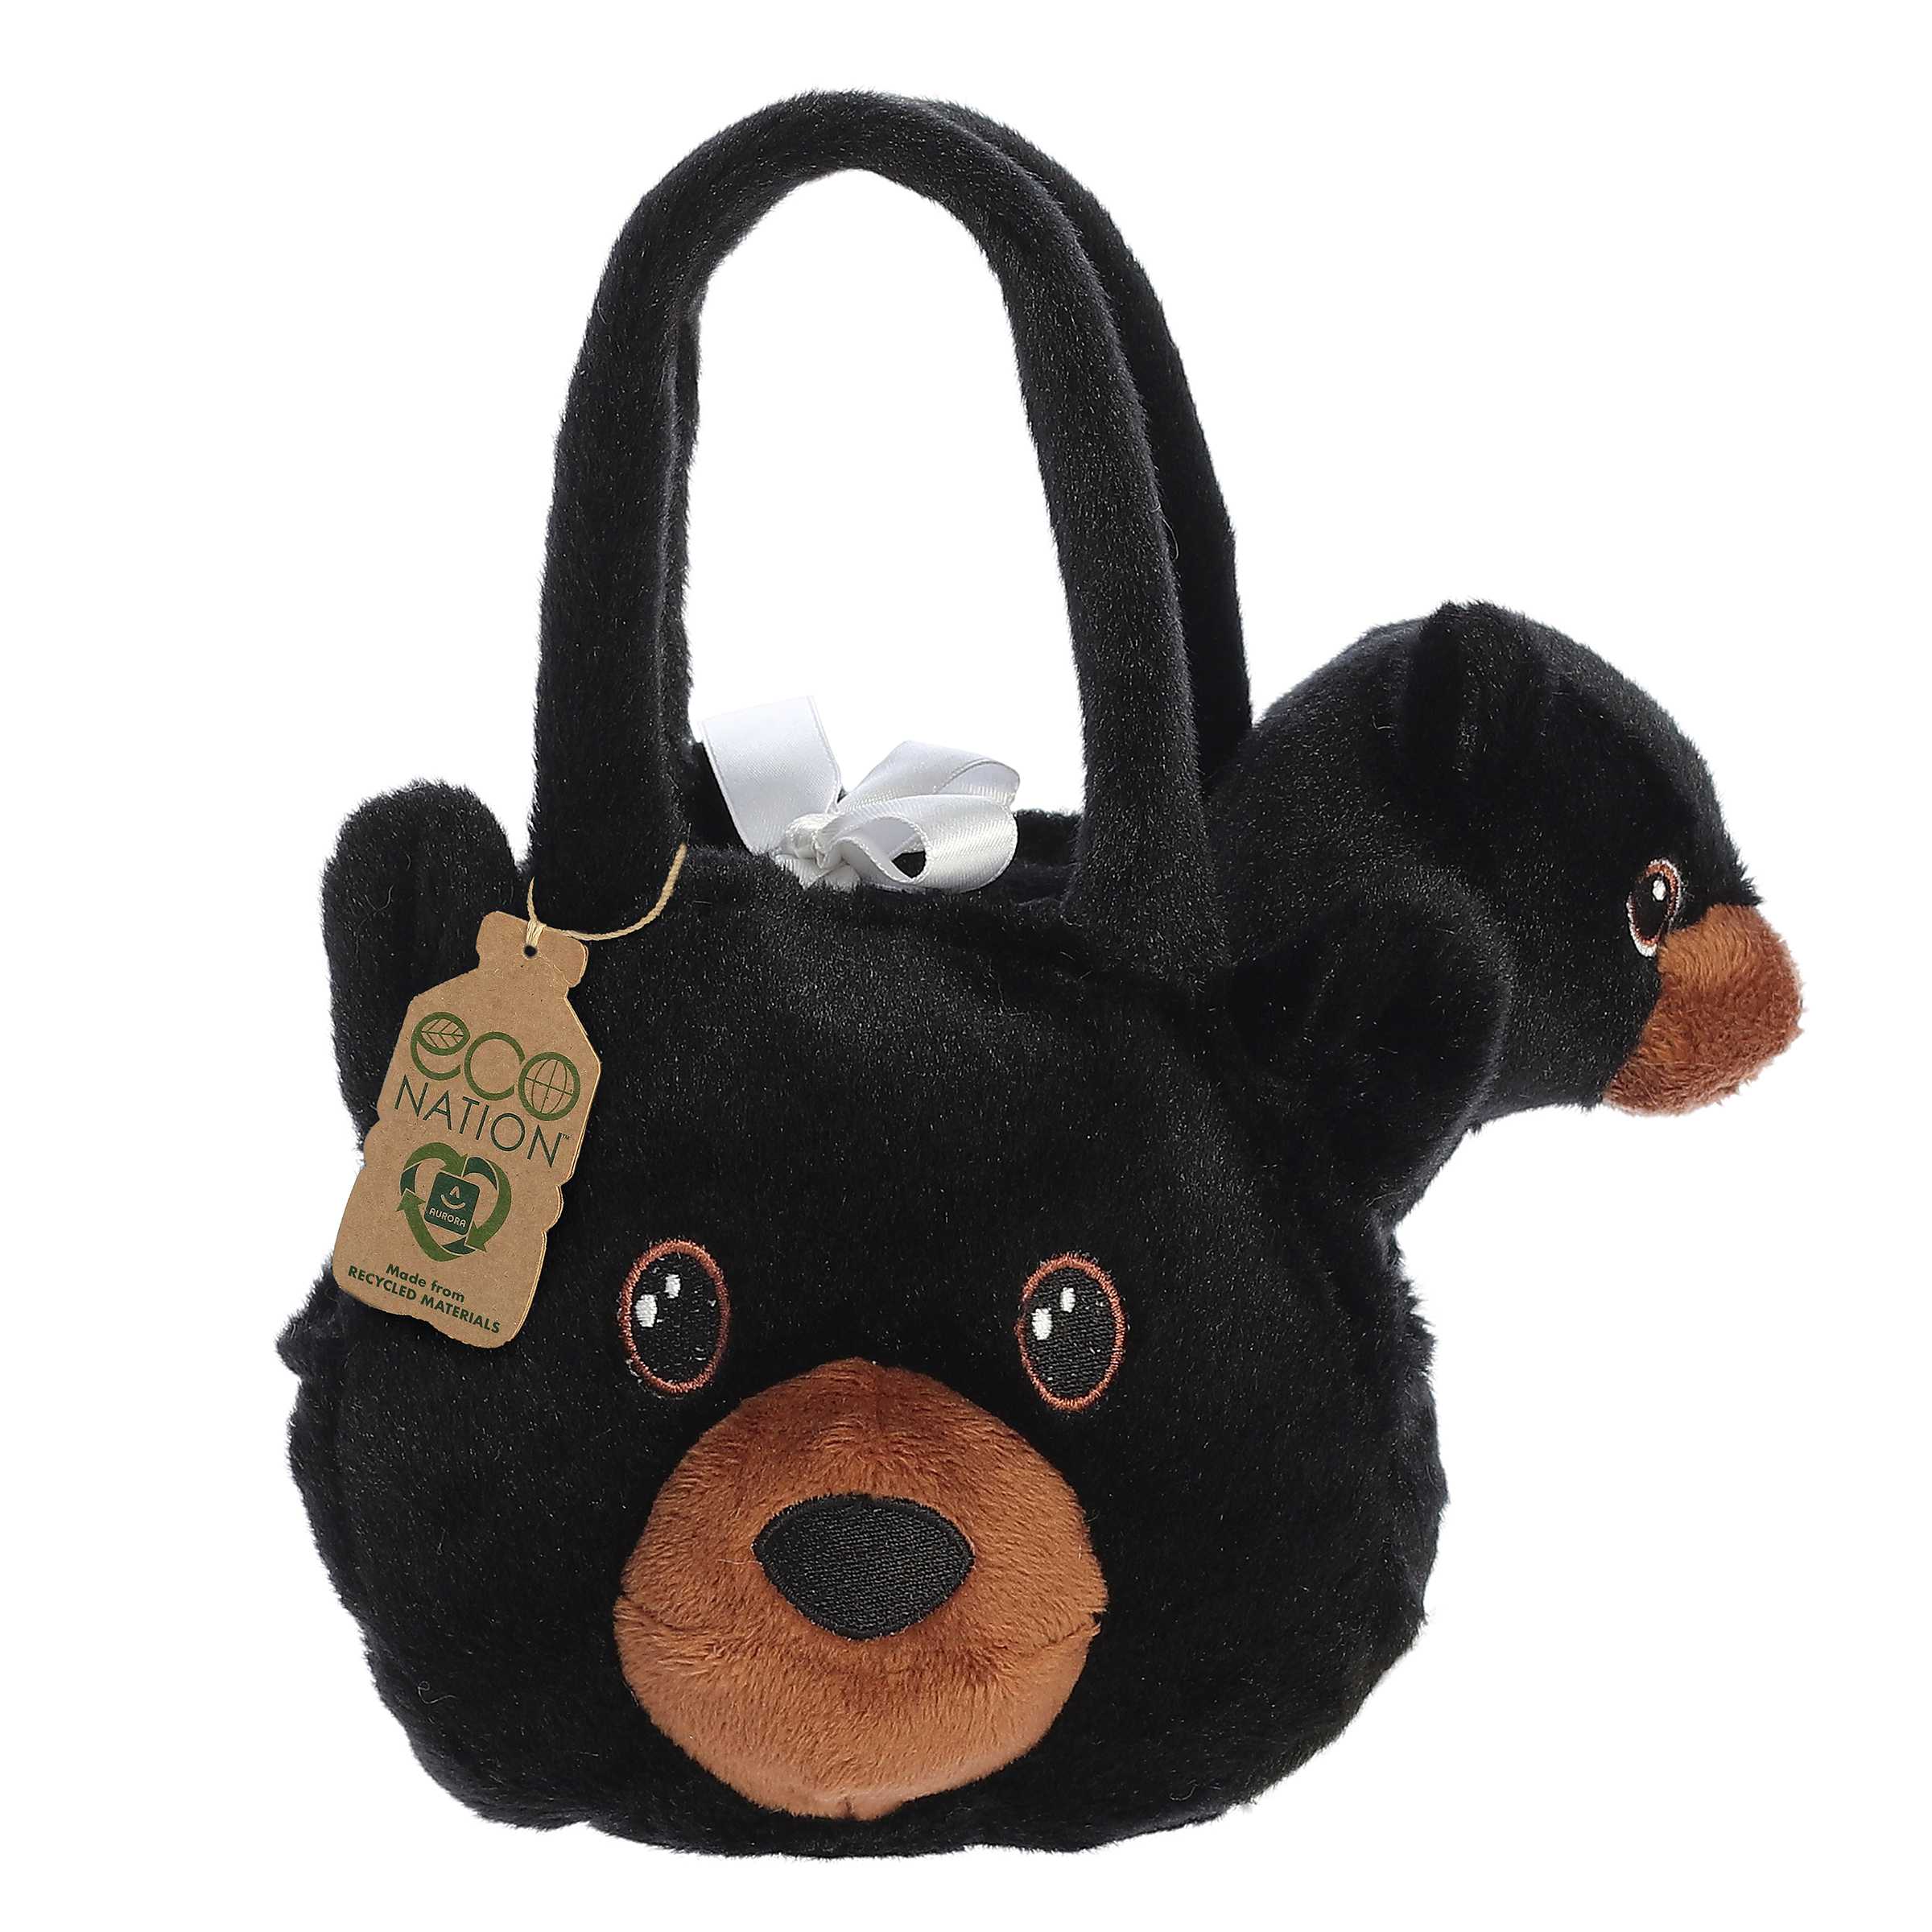 Eco Nation Black Bear Plush in a bear head-shaped plush carrier, crafted from recycled materials.